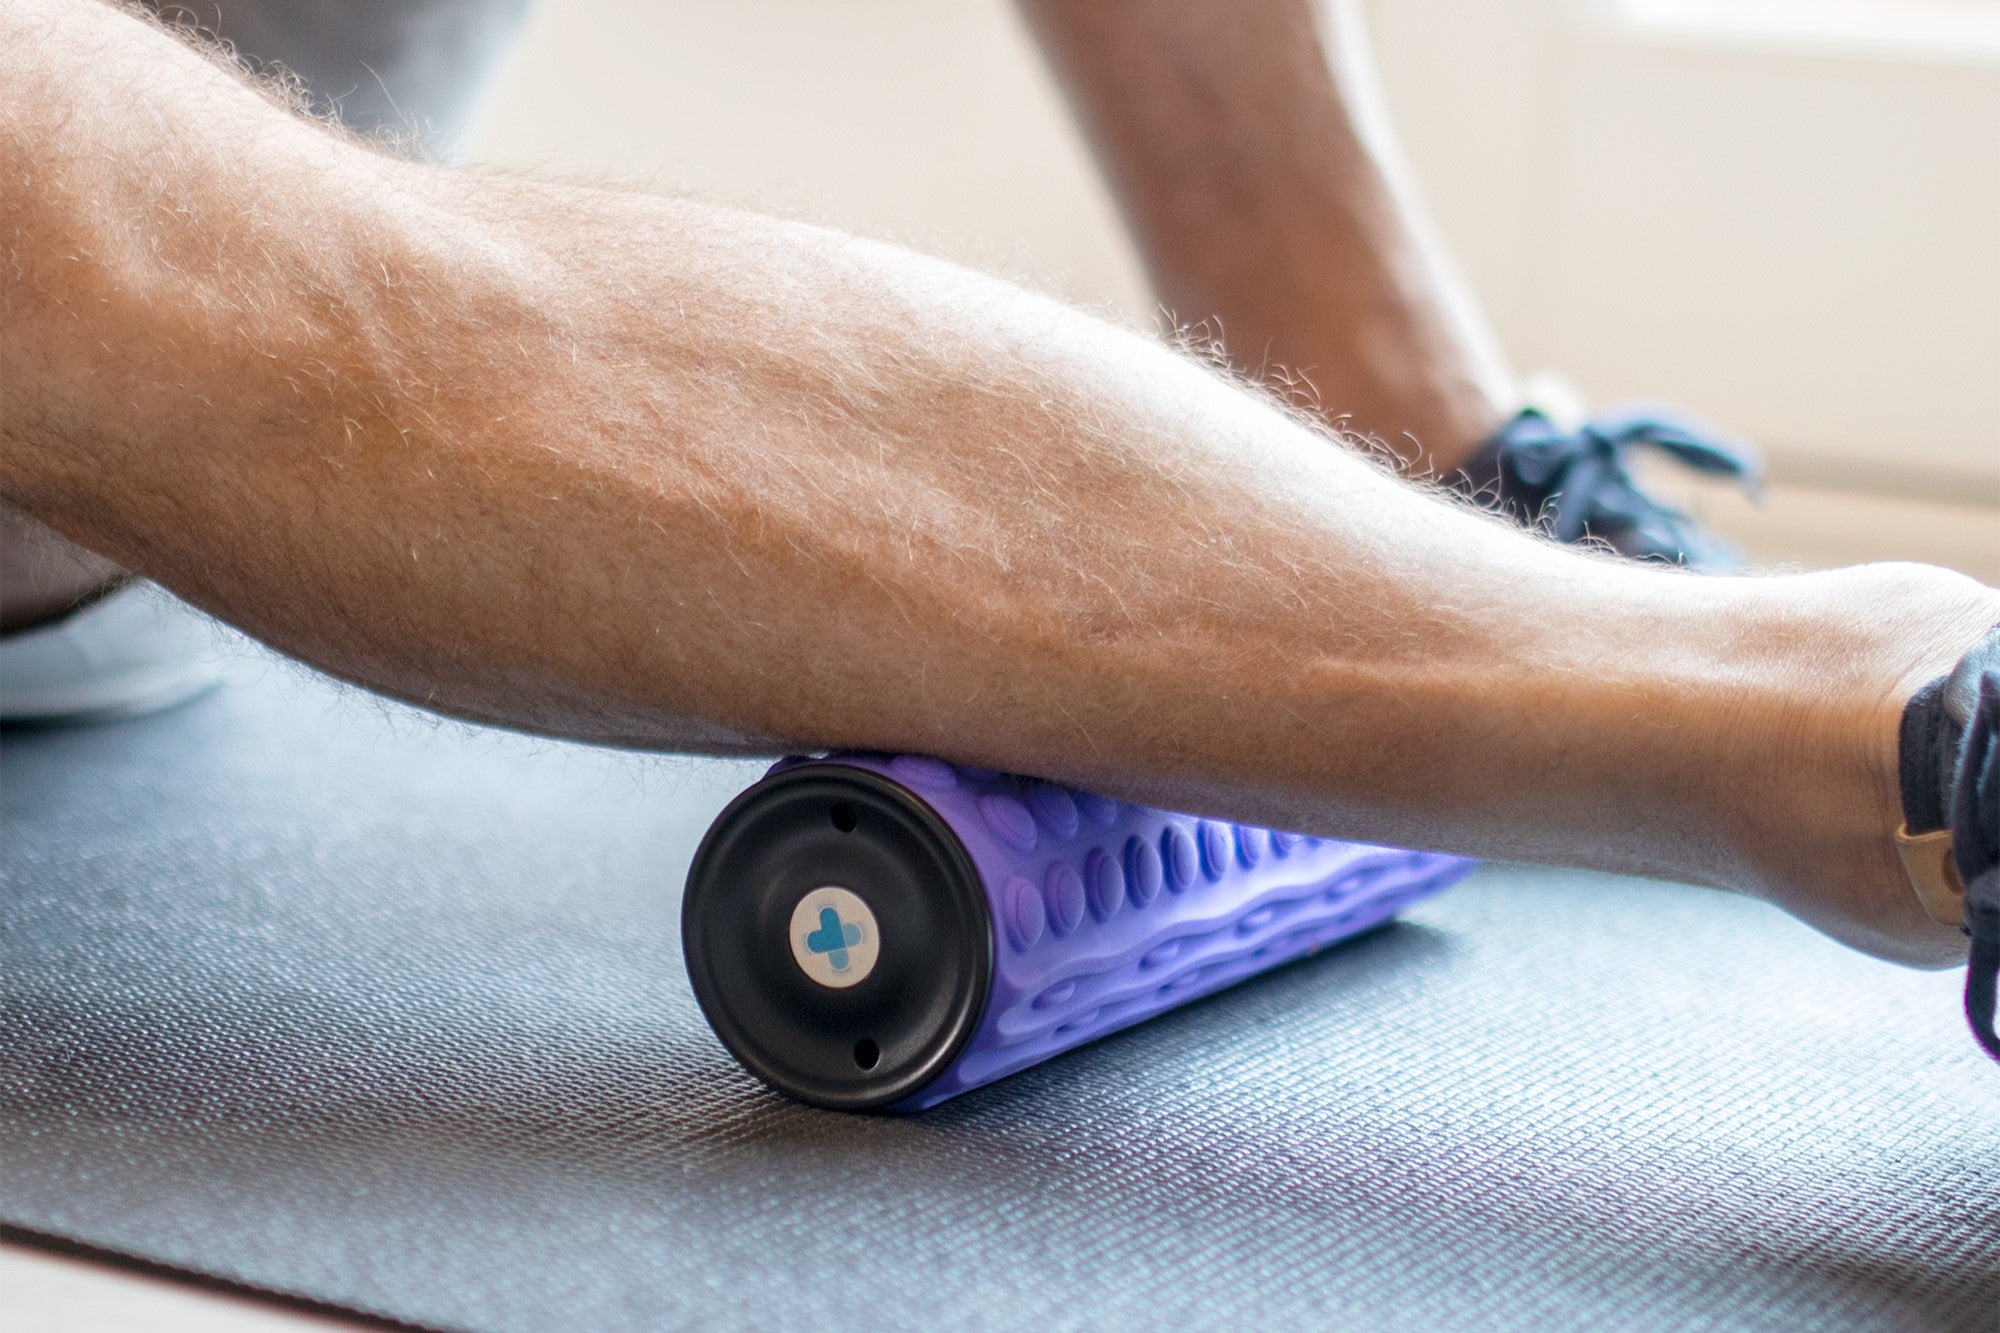 The Essential Guide to Foam Rolling Legs: 5 Top Exercises